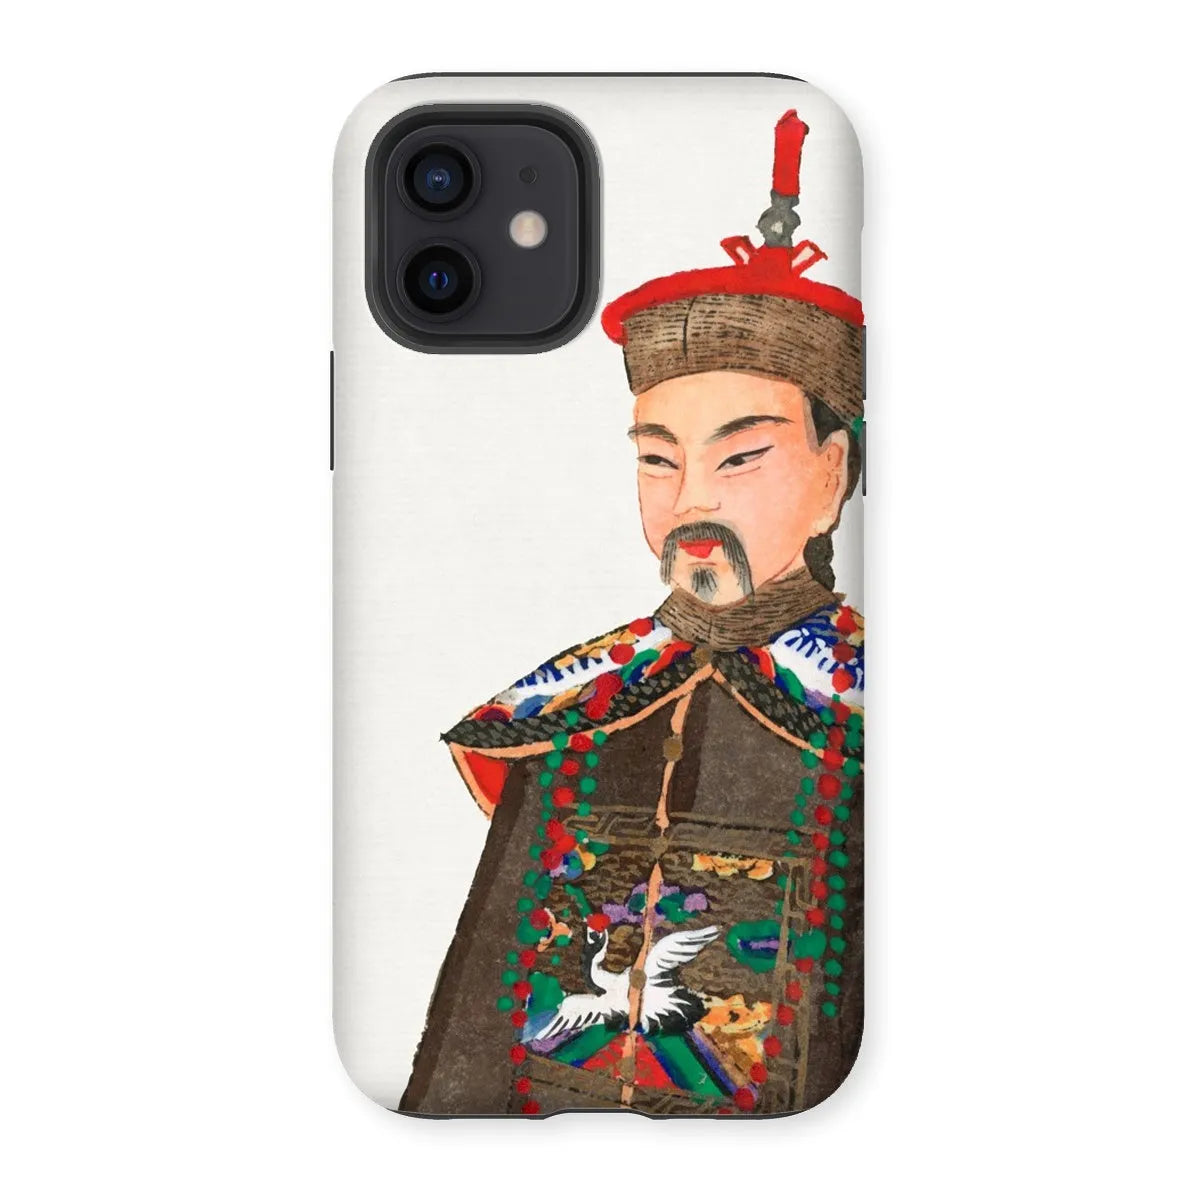 Nobleman At Court - Chinese Aesthetic Manchu Art Phone Case - Iphone Xs / Matte - Mobile Phone Cases - Aesthetic Art